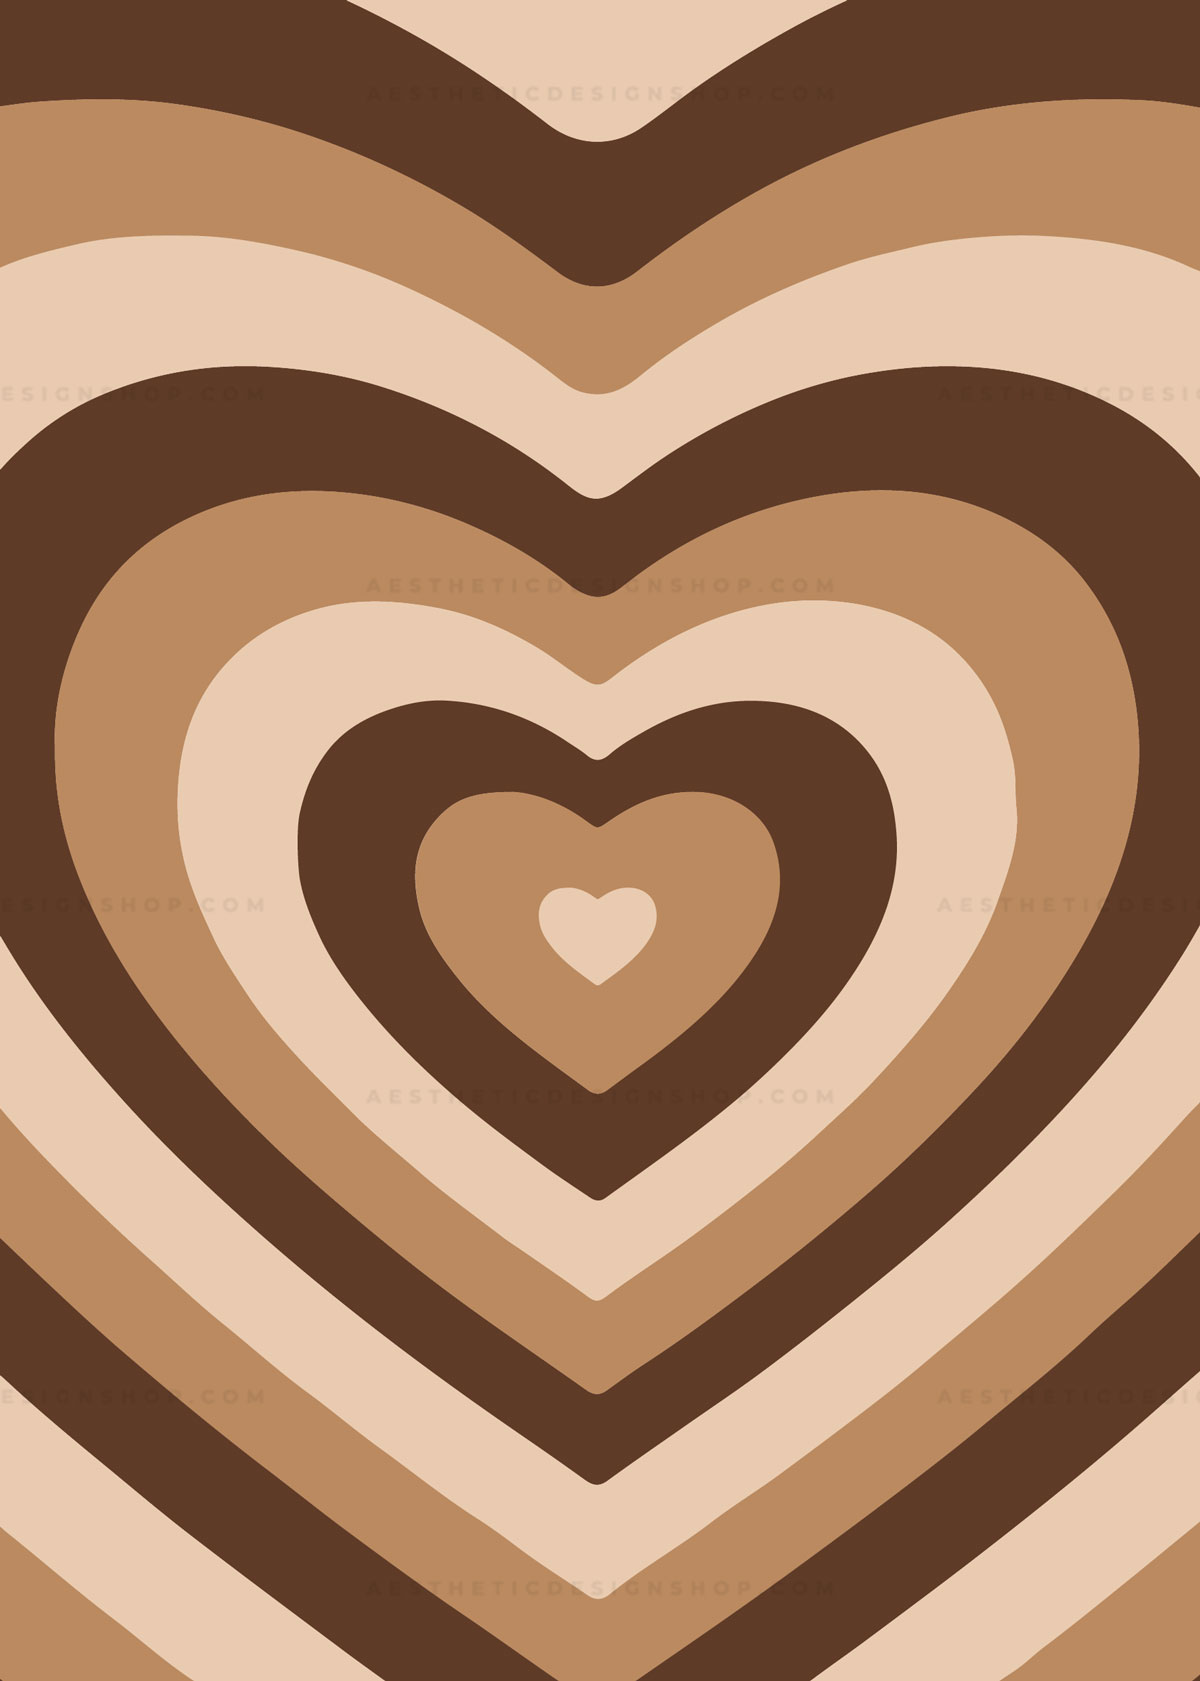 Brown aesthetic heart background image ⋆ Aesthetic Design Shop